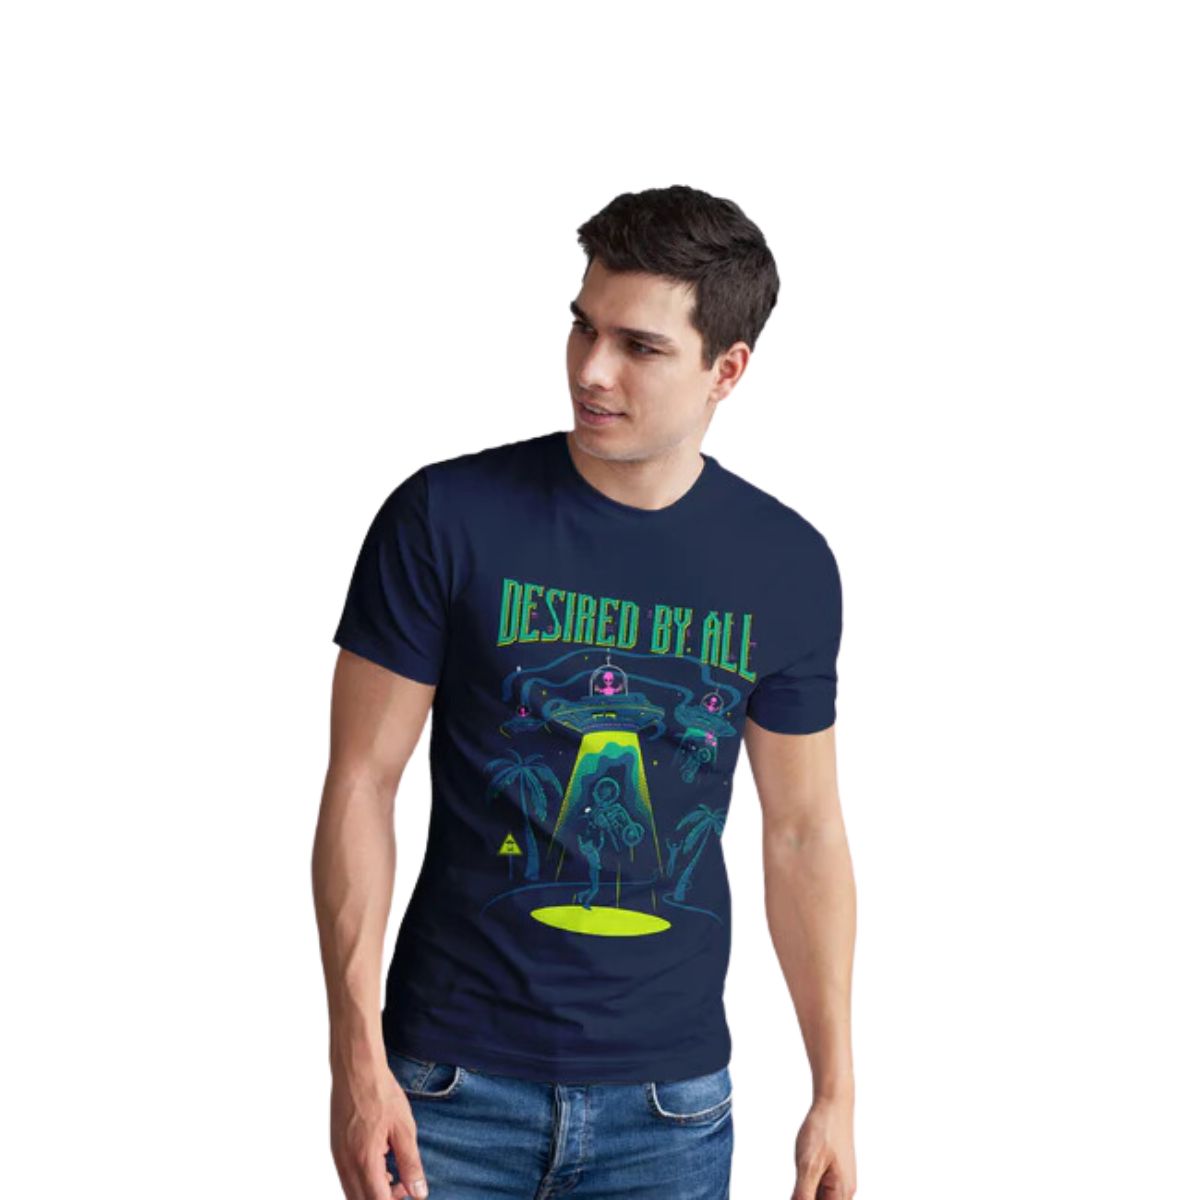 Desired by All - UV Reactive T-Shirt - Unisex 1